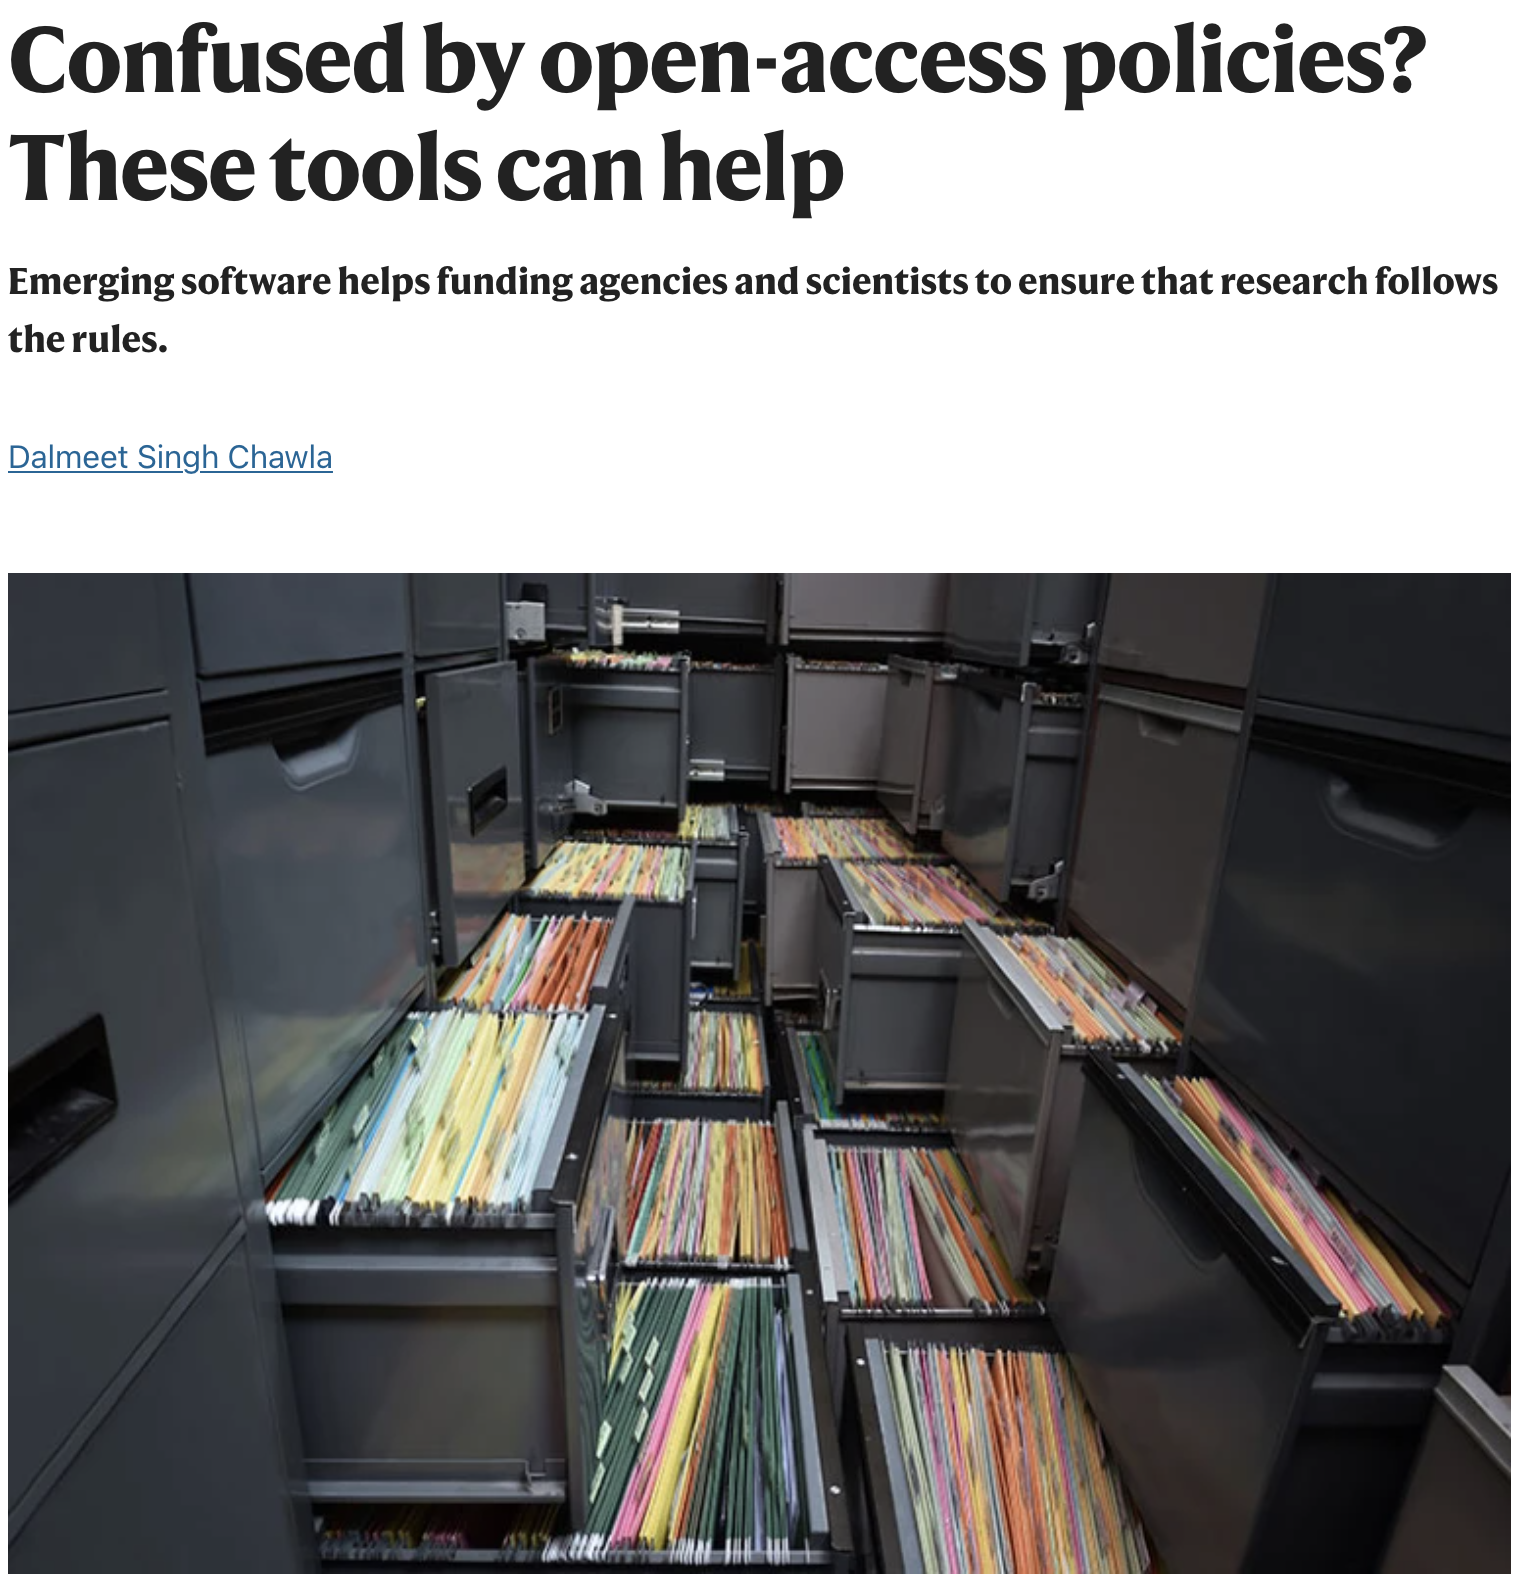 A screenshot Nature’s website shows the title "Confused by open-access policies? These tools can help" alongside a decorative image of a room full of open filing cases.